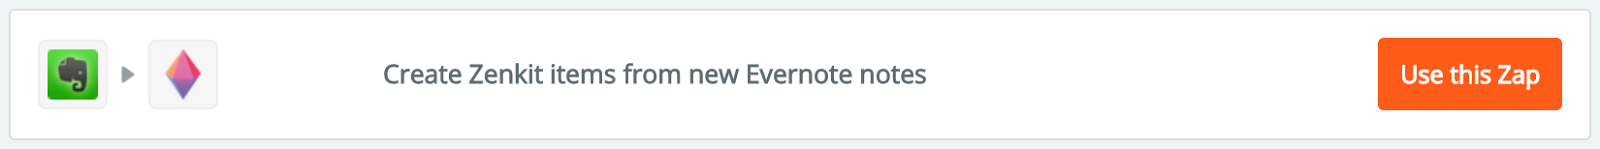 create zenkit items from evernote notes zap